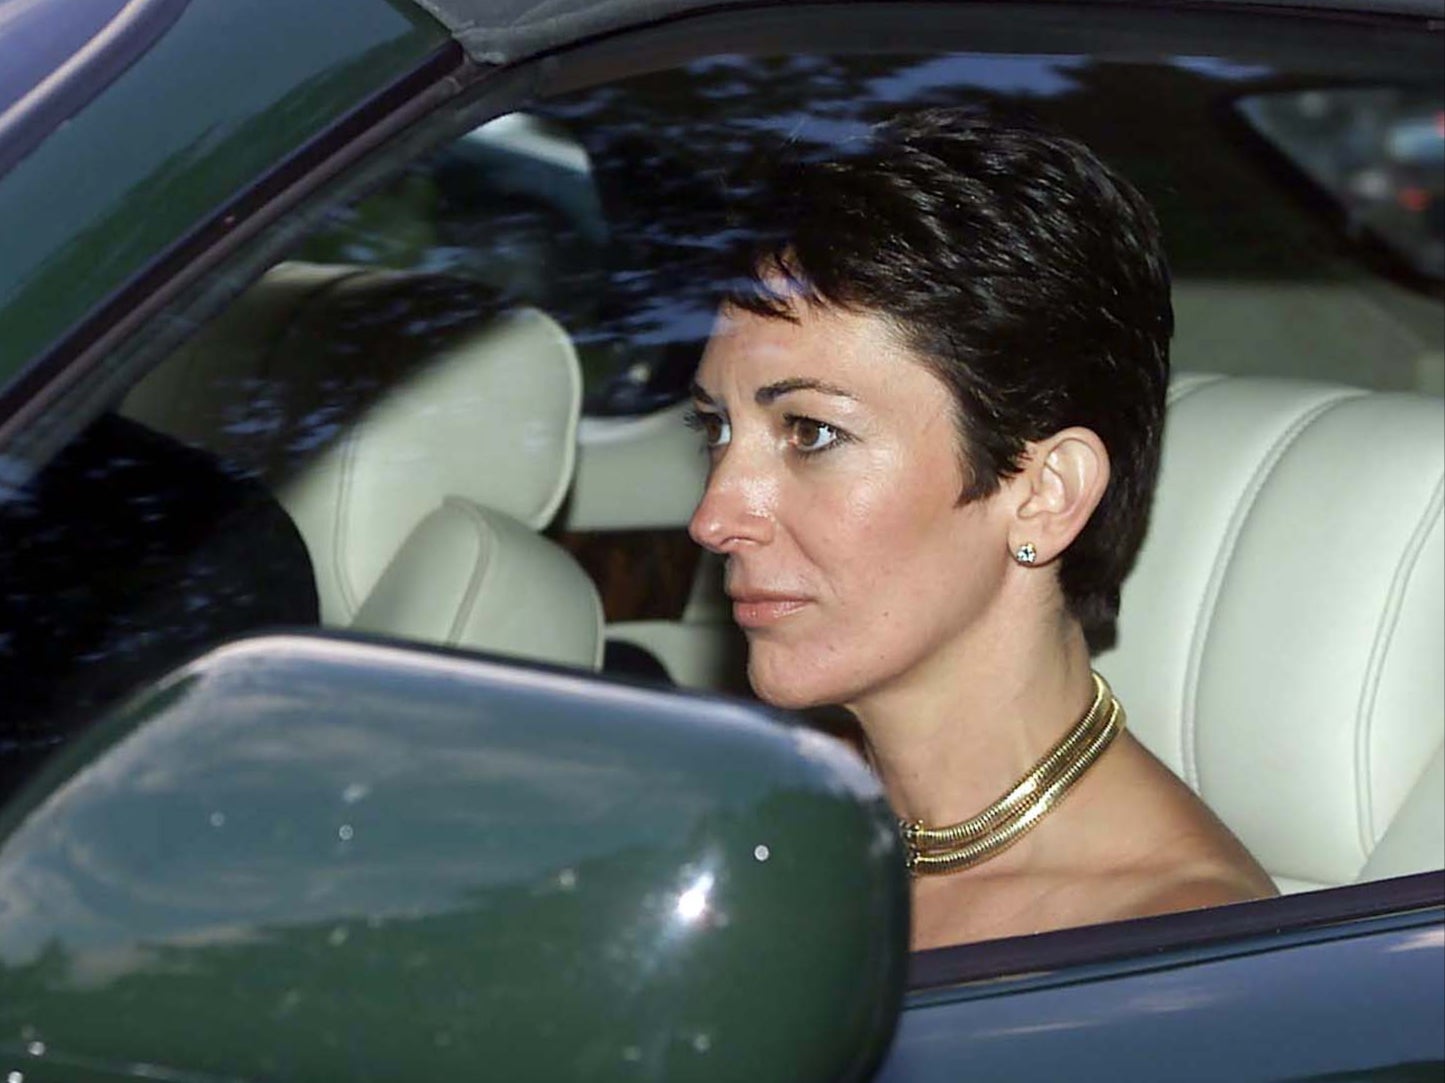 Ghislaine Maxwell has been accused of facilitating Jeffrey Epstein’s sexual exploitation of underage girls